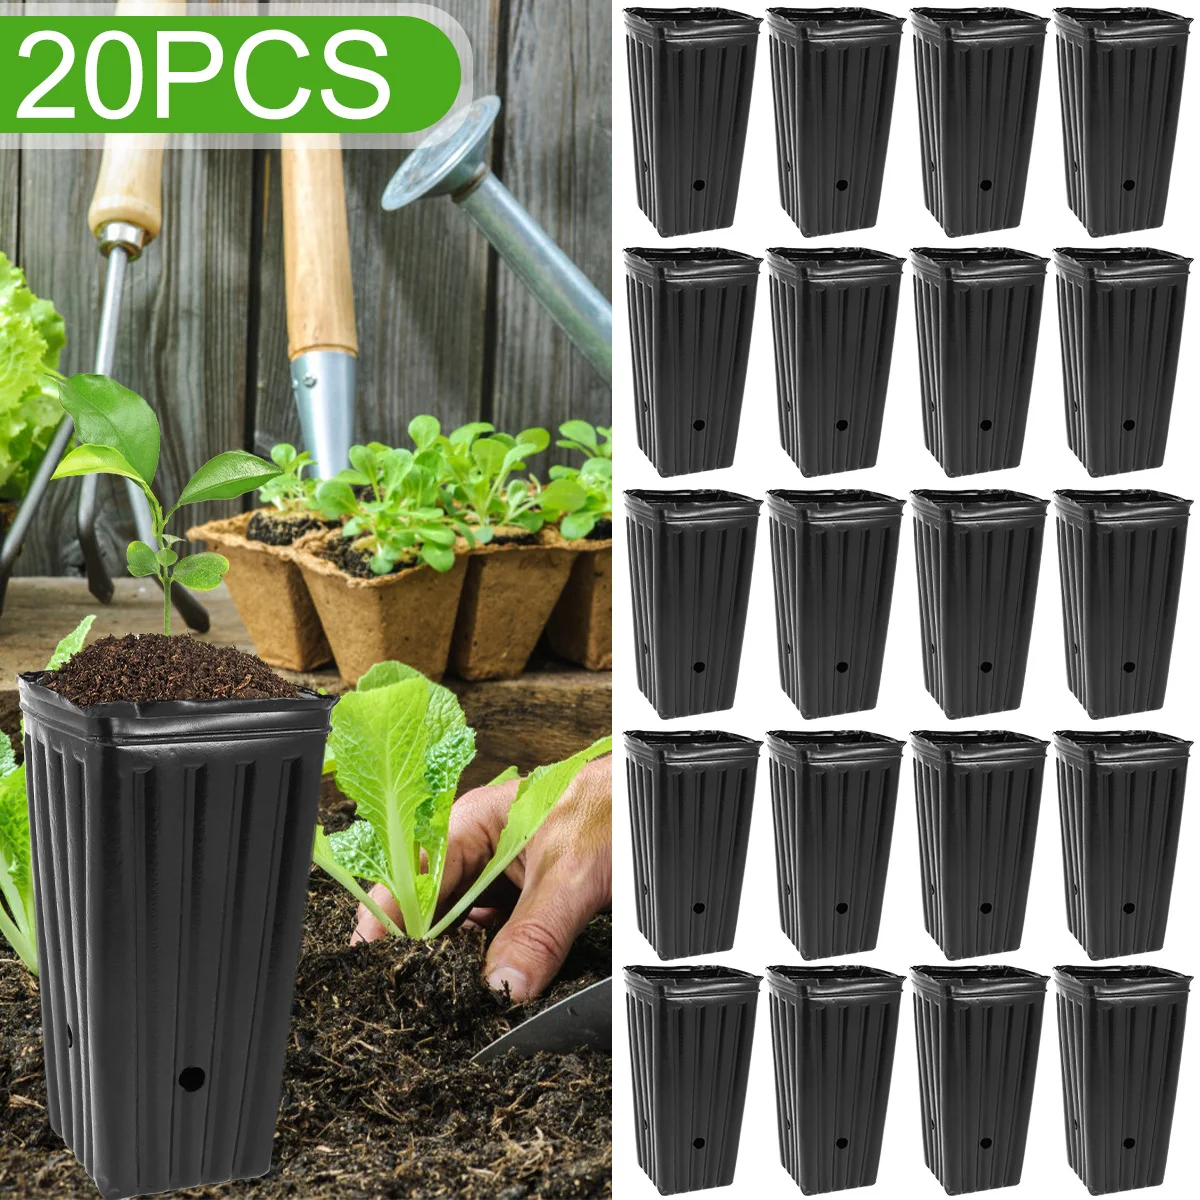 20Pcs Tall Tree Pot Plastic Deep Nursery Treepot 7.8inch Tall Seedling Flower Plant Container with Drainage Holes Reusable